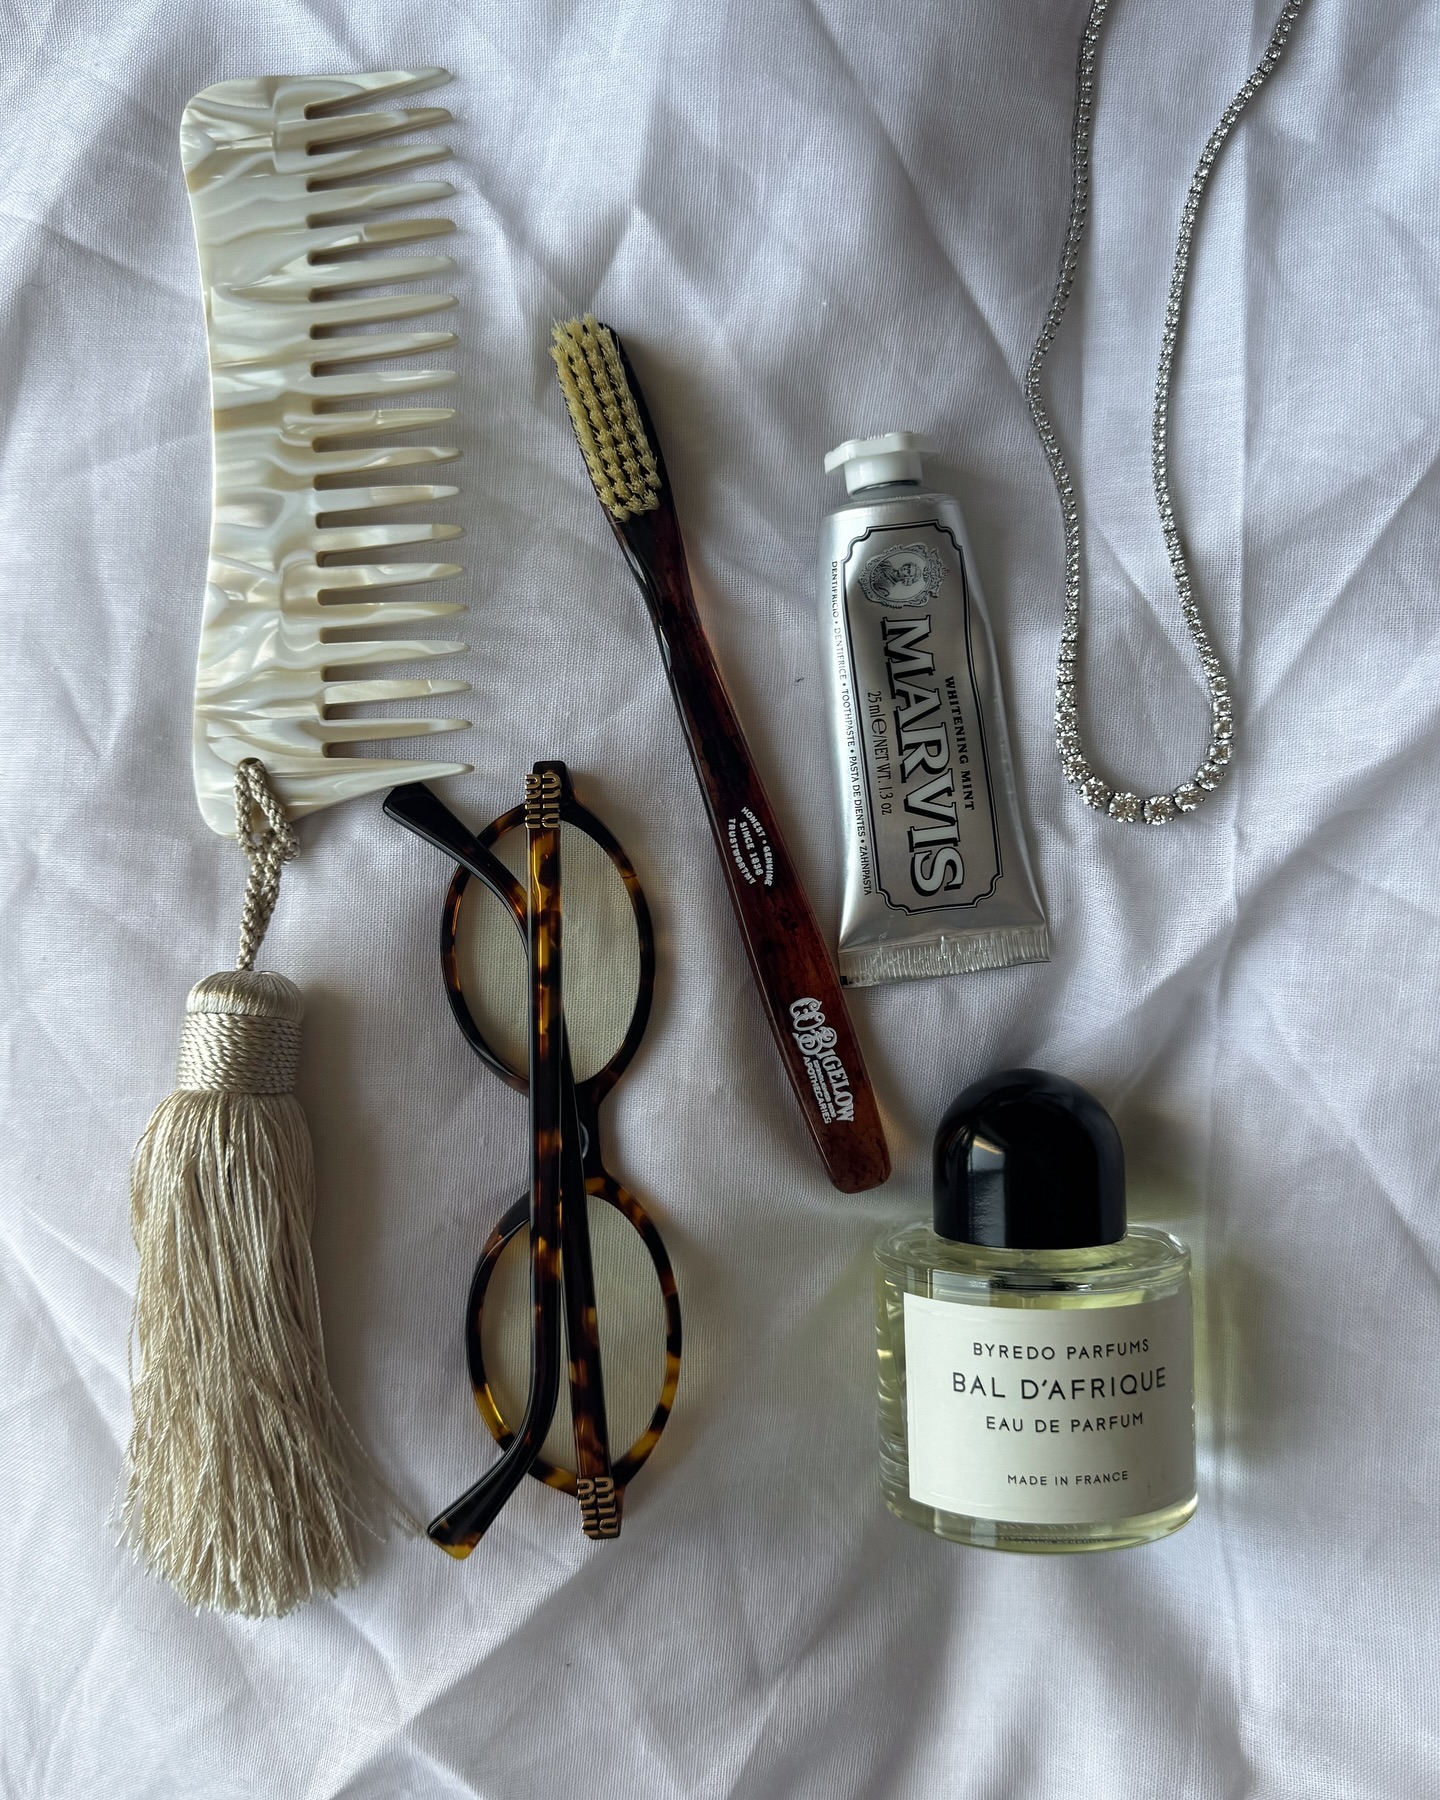 Miu Miu glasses on a sheet next to marble comb, brush, perfume bottle, and toothpaste.